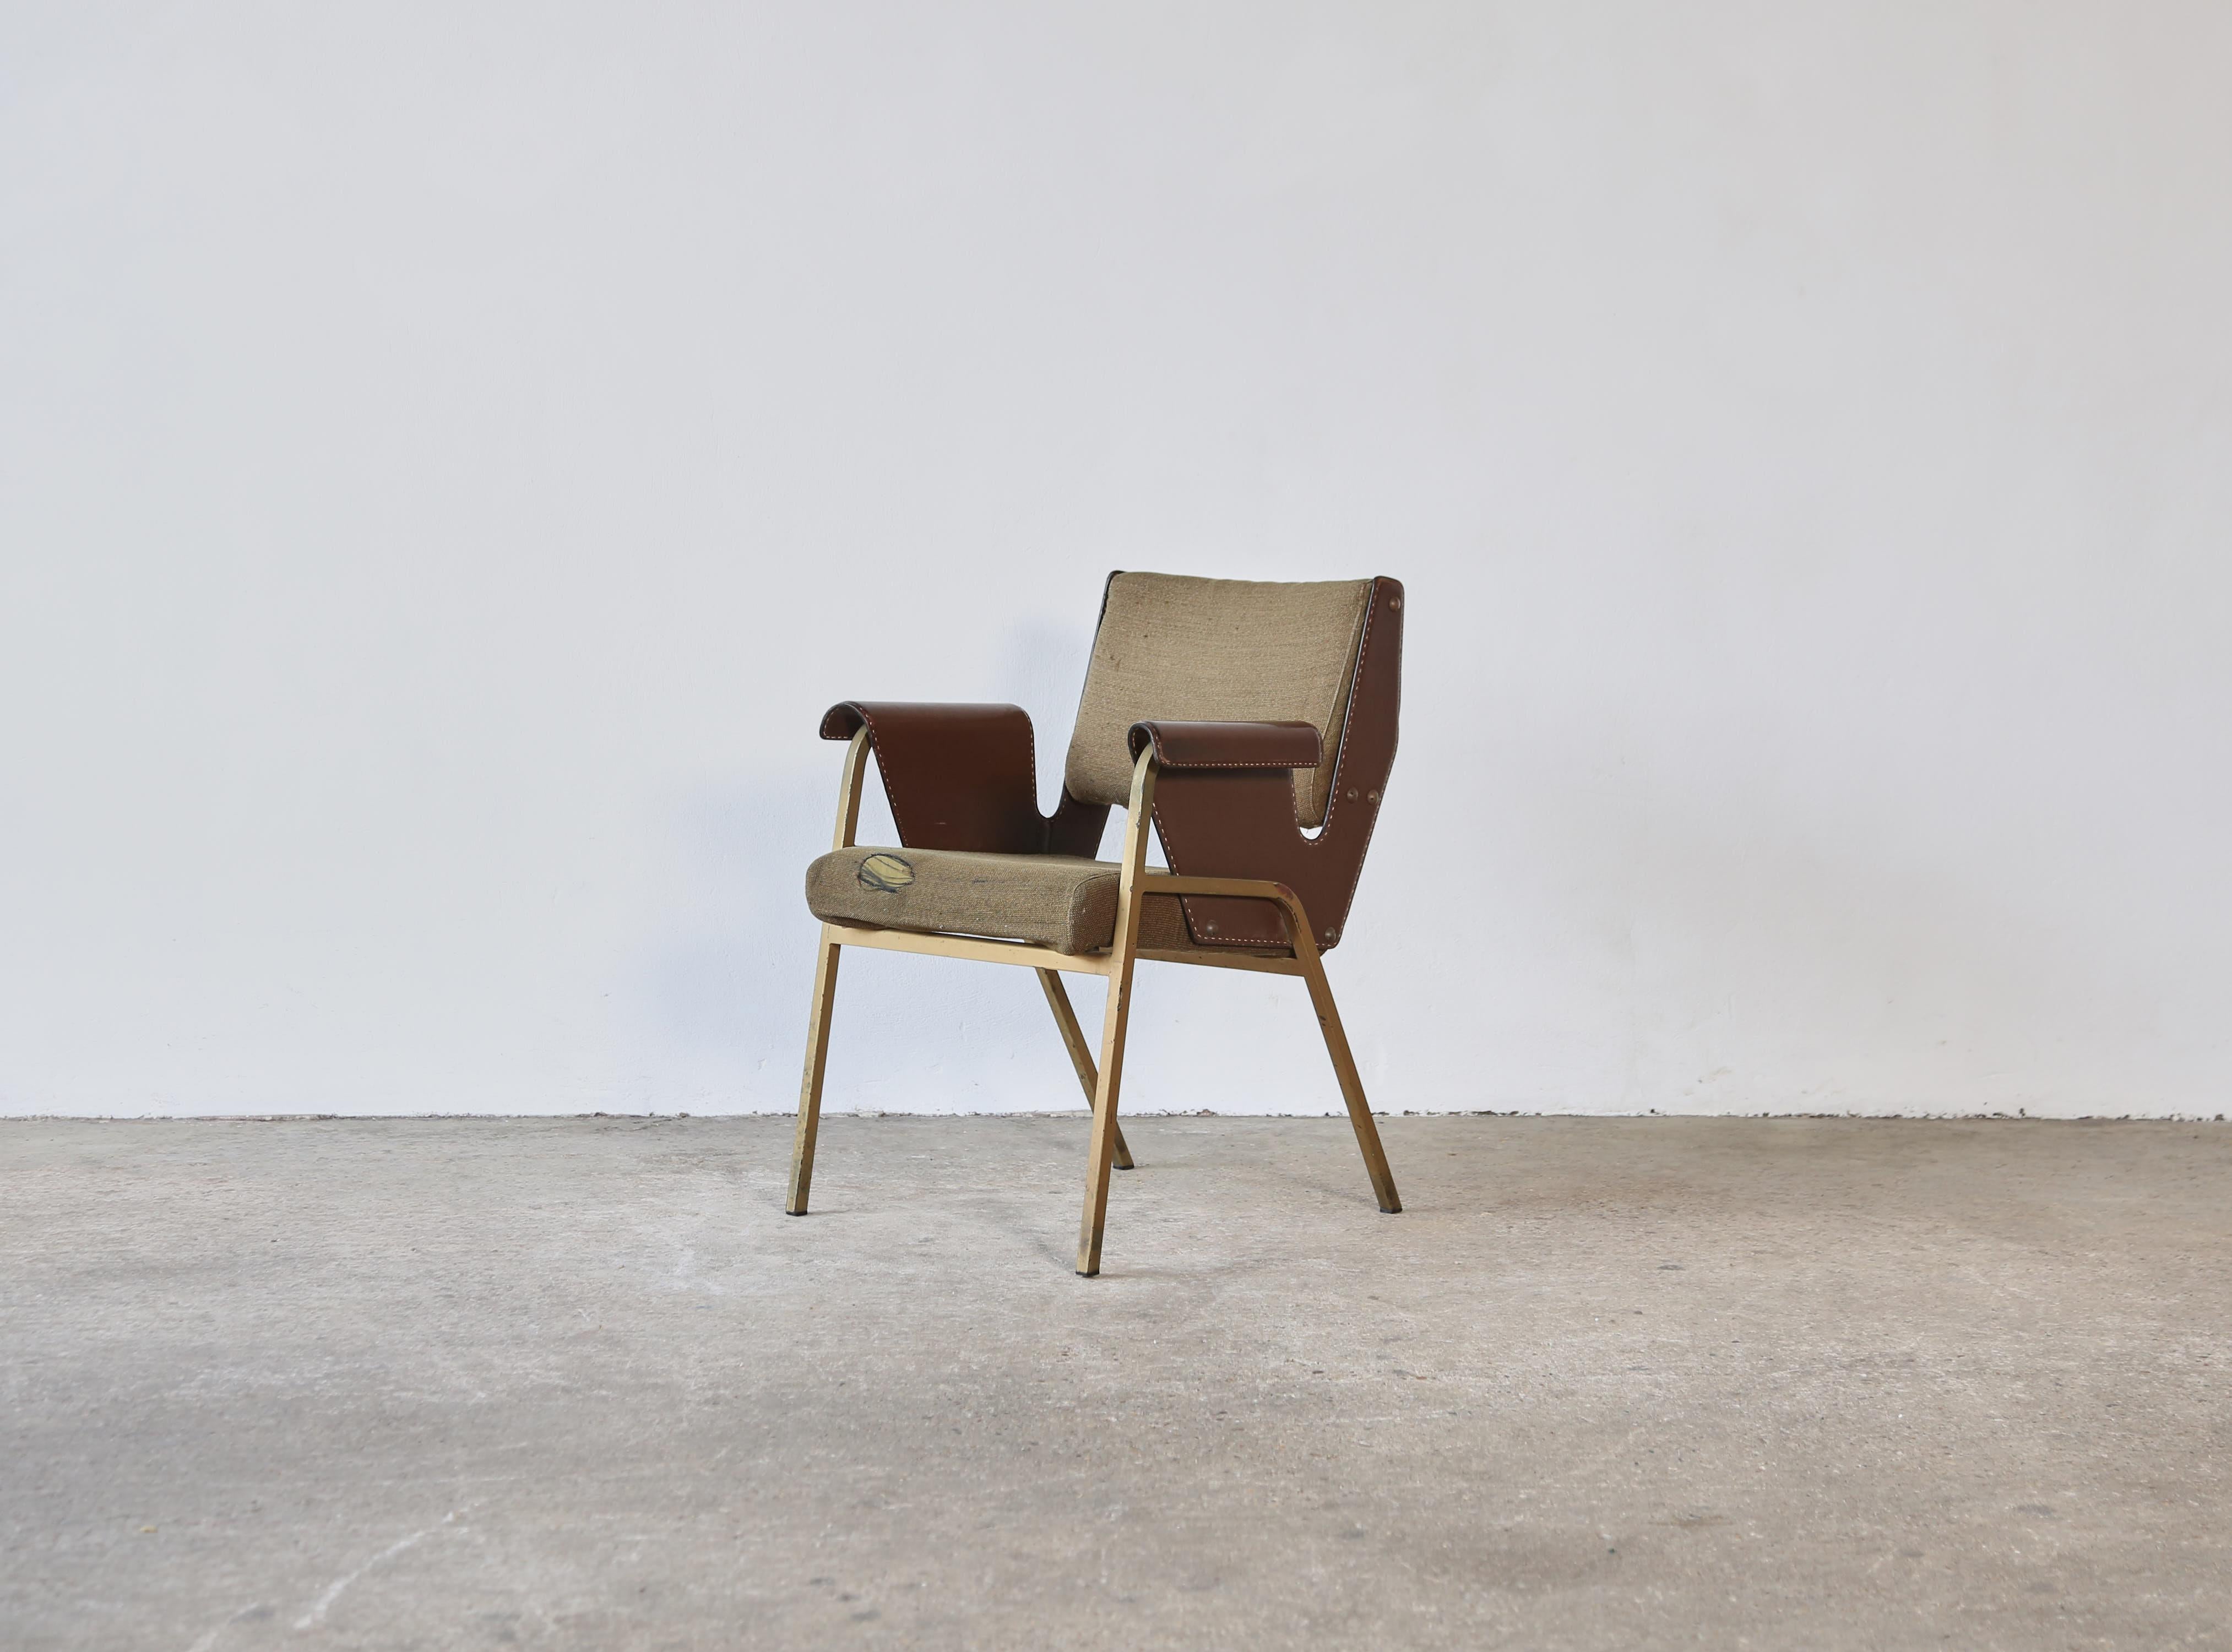 A Gustavo Pulitzer Albenga Chair, for Arflex, Italy, 1950s. This version with a nice rare brass plated frame. The original fabric is worn and requires recovering. Fast shipping worldwide.



   

